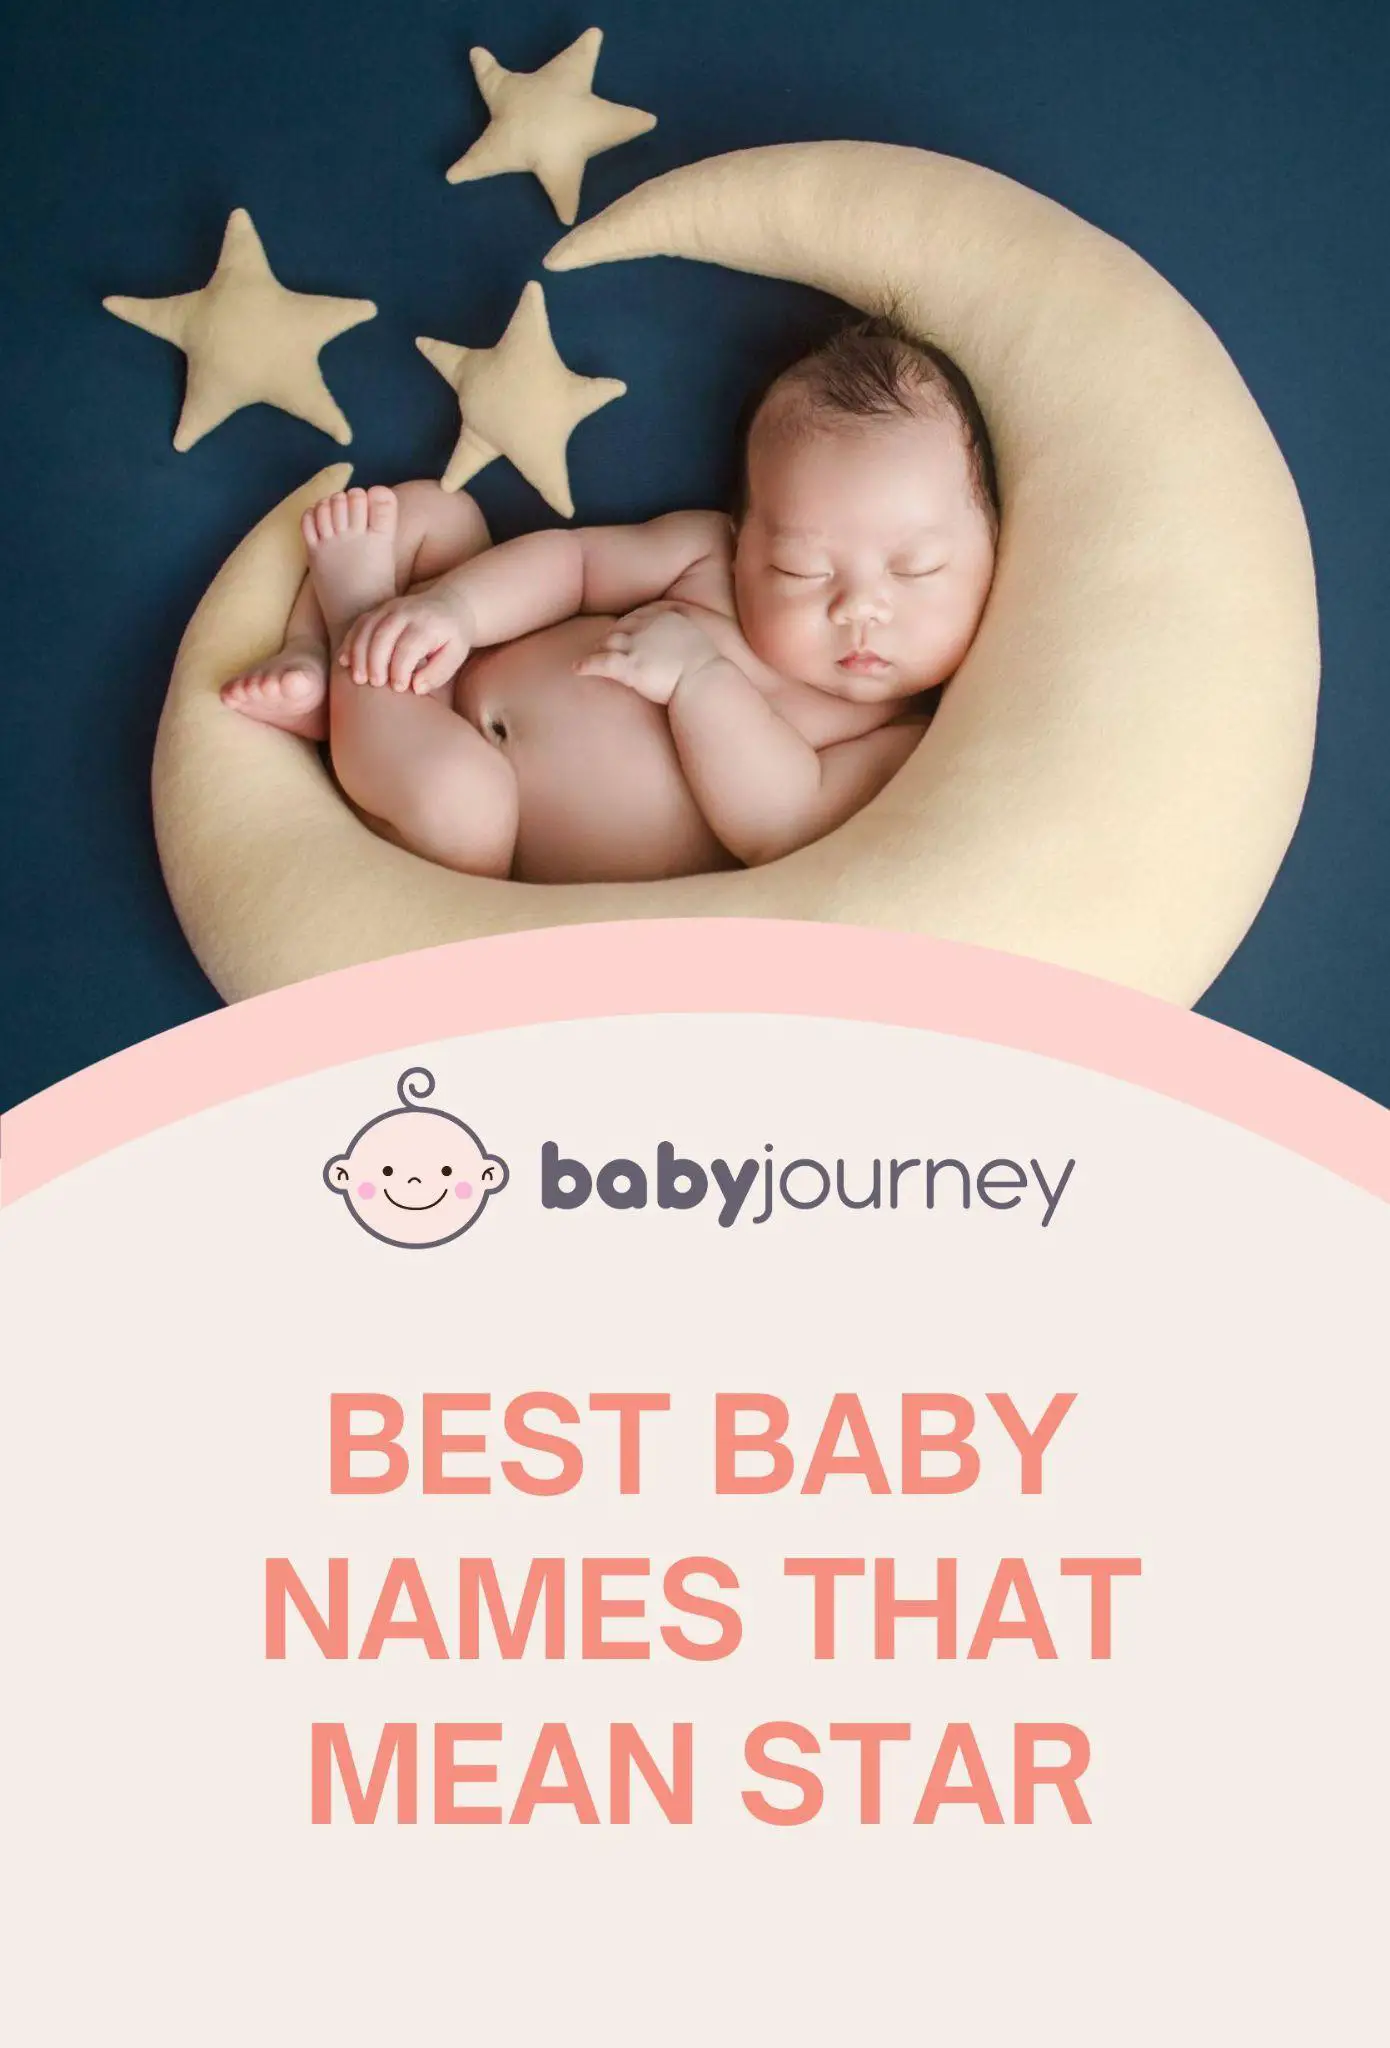 Best Baby Names That Mean Star pinterest - Baby Journey